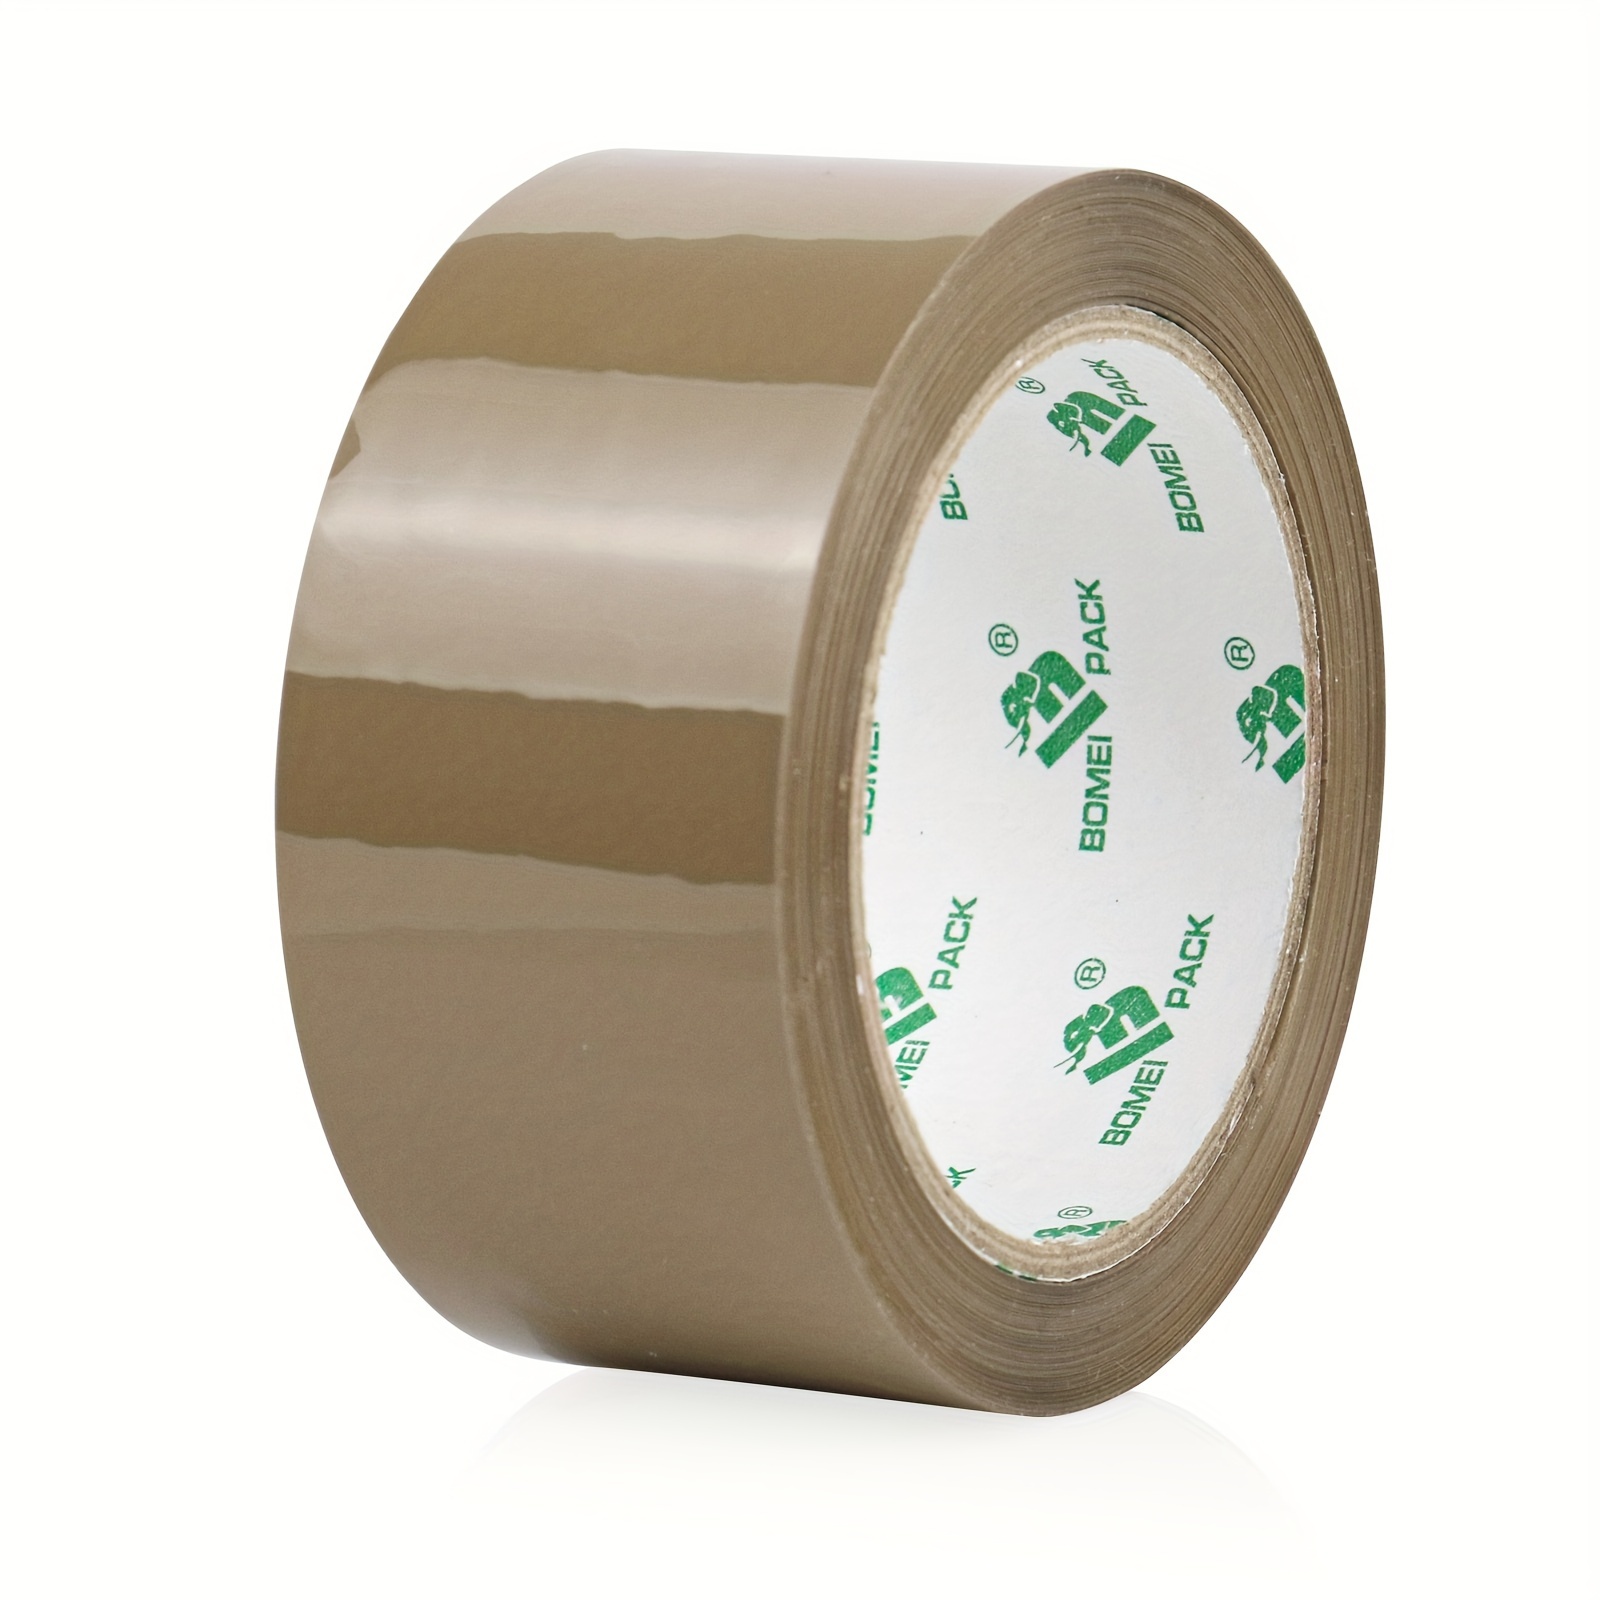 

1pc Brown Tape, Width 1.89in X 55yds, Heavy-duty Transport Tape, Sealing Tape, Packaging Tape, Moving Tape, Used For Packing In Schools, Offices, Homes, And Factories